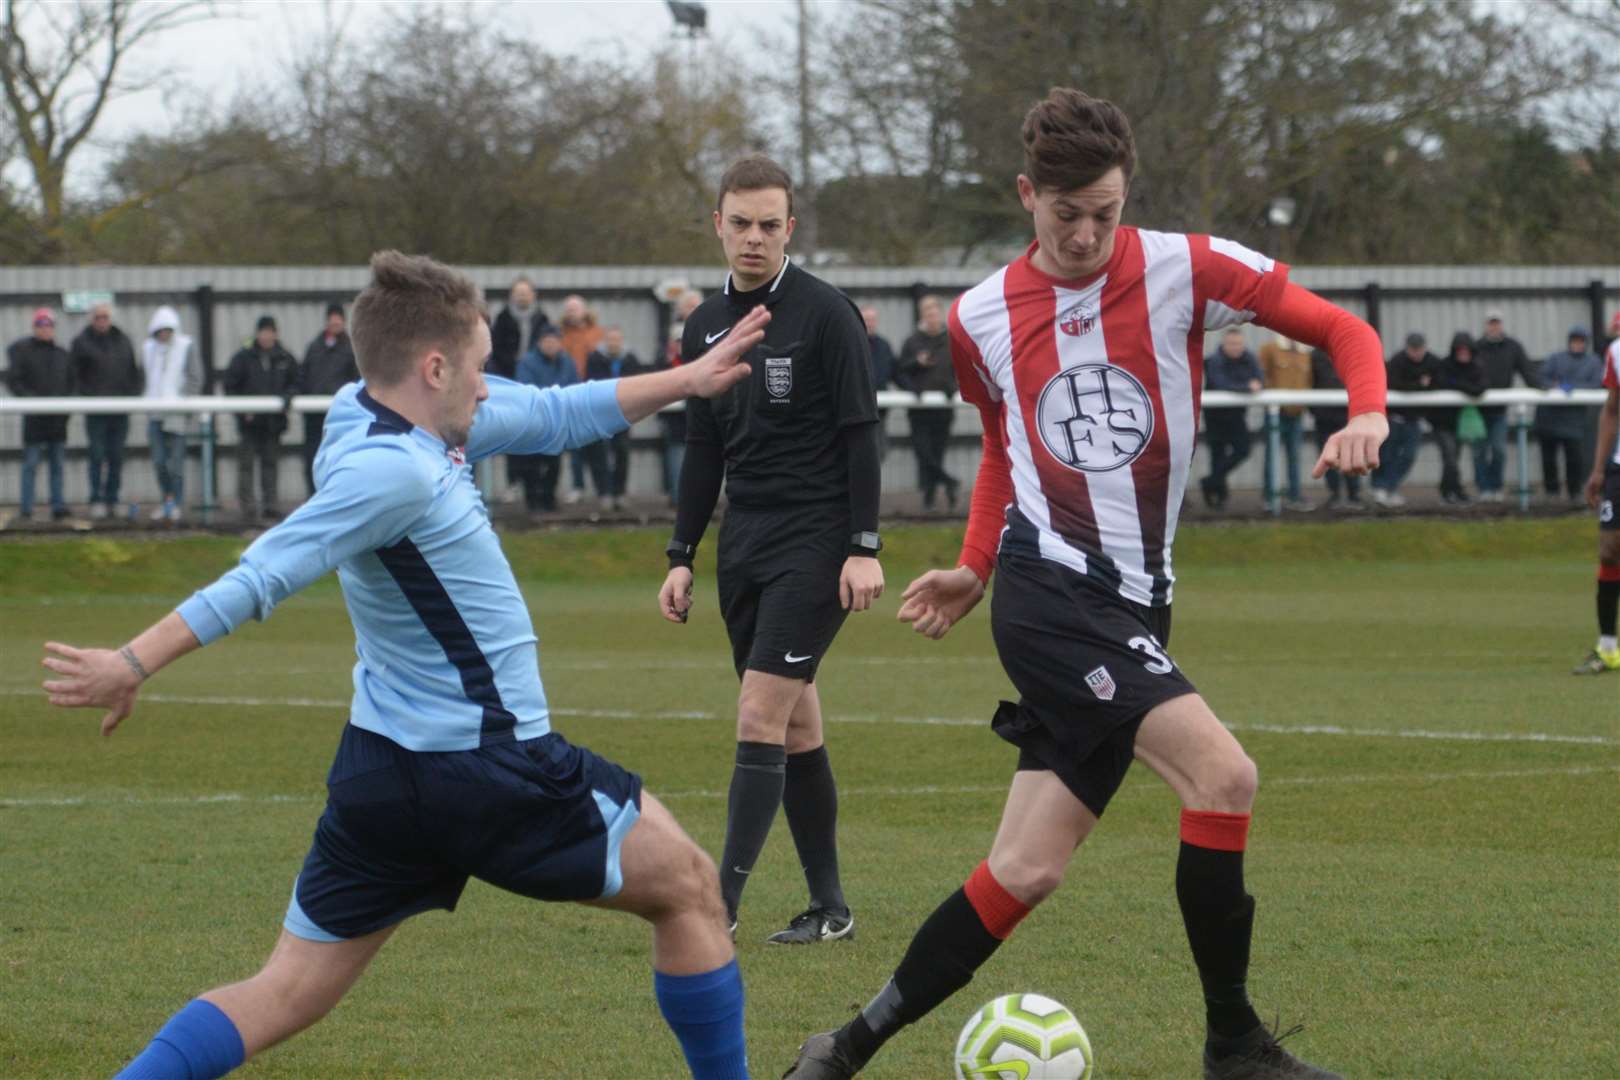 Sheppey United played Glebe on the final weekend of the SCEFL season Picture: Chris Davey